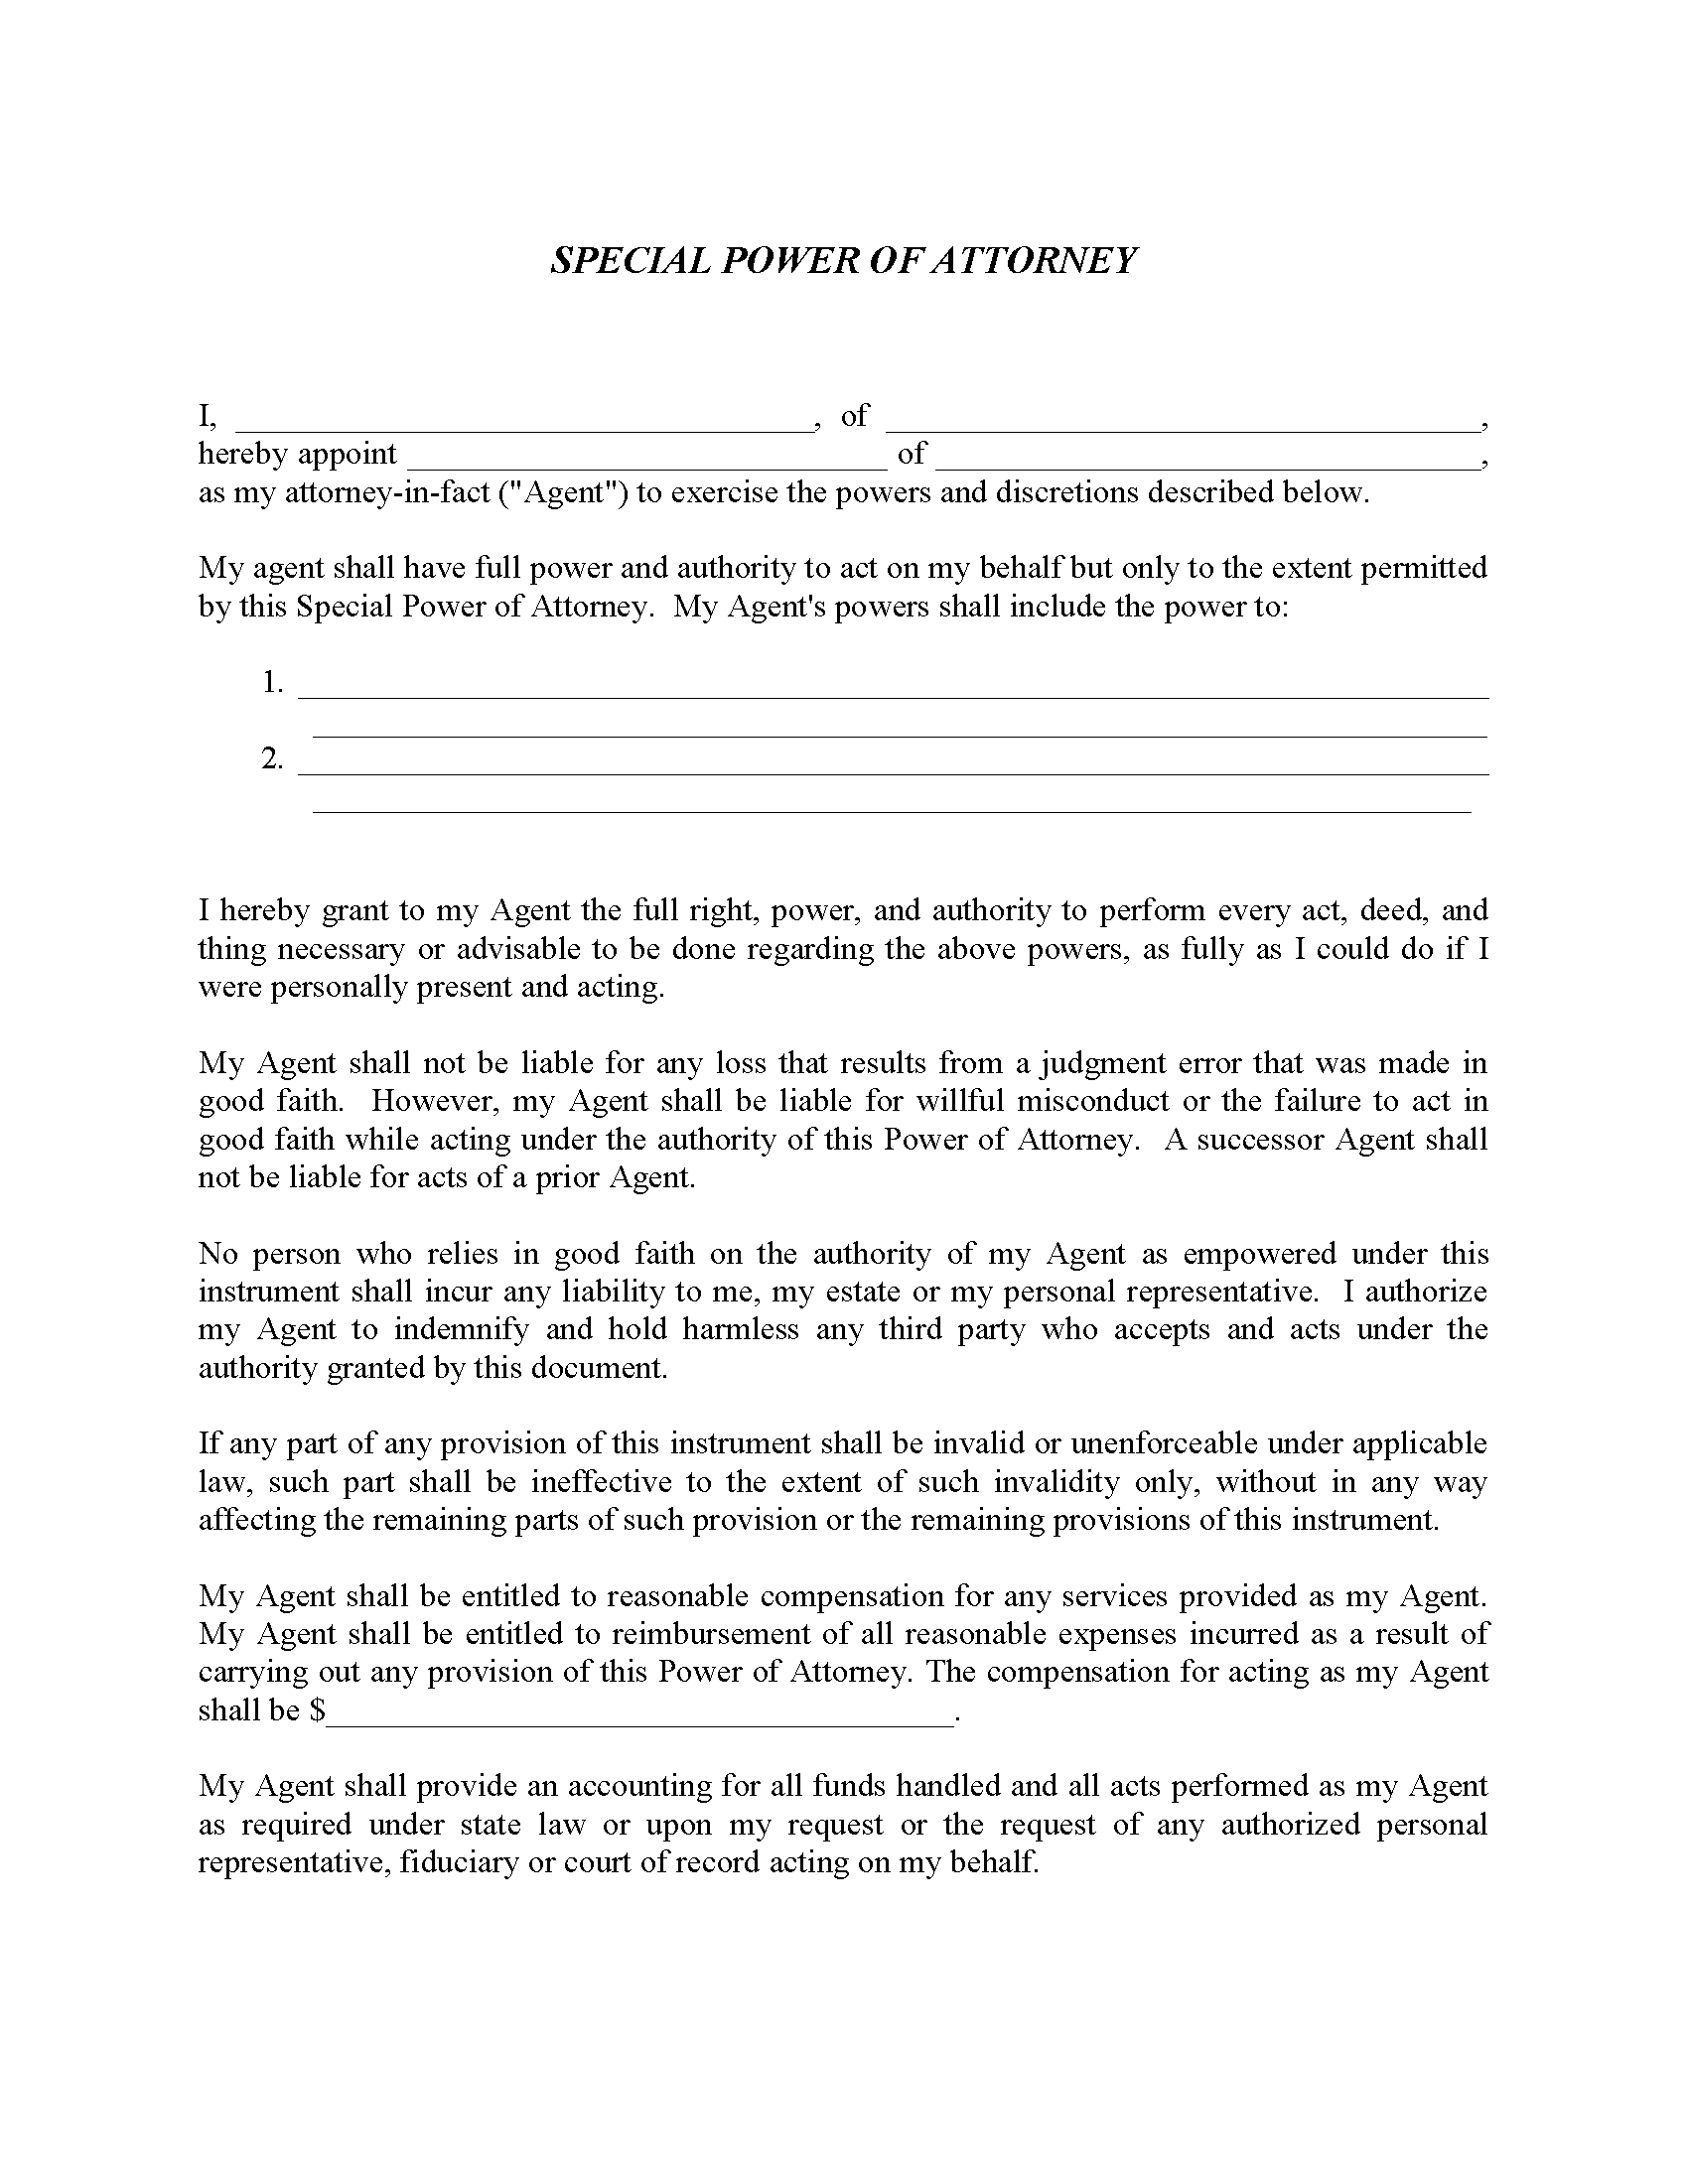 Special Power Of Attorney Printable Images